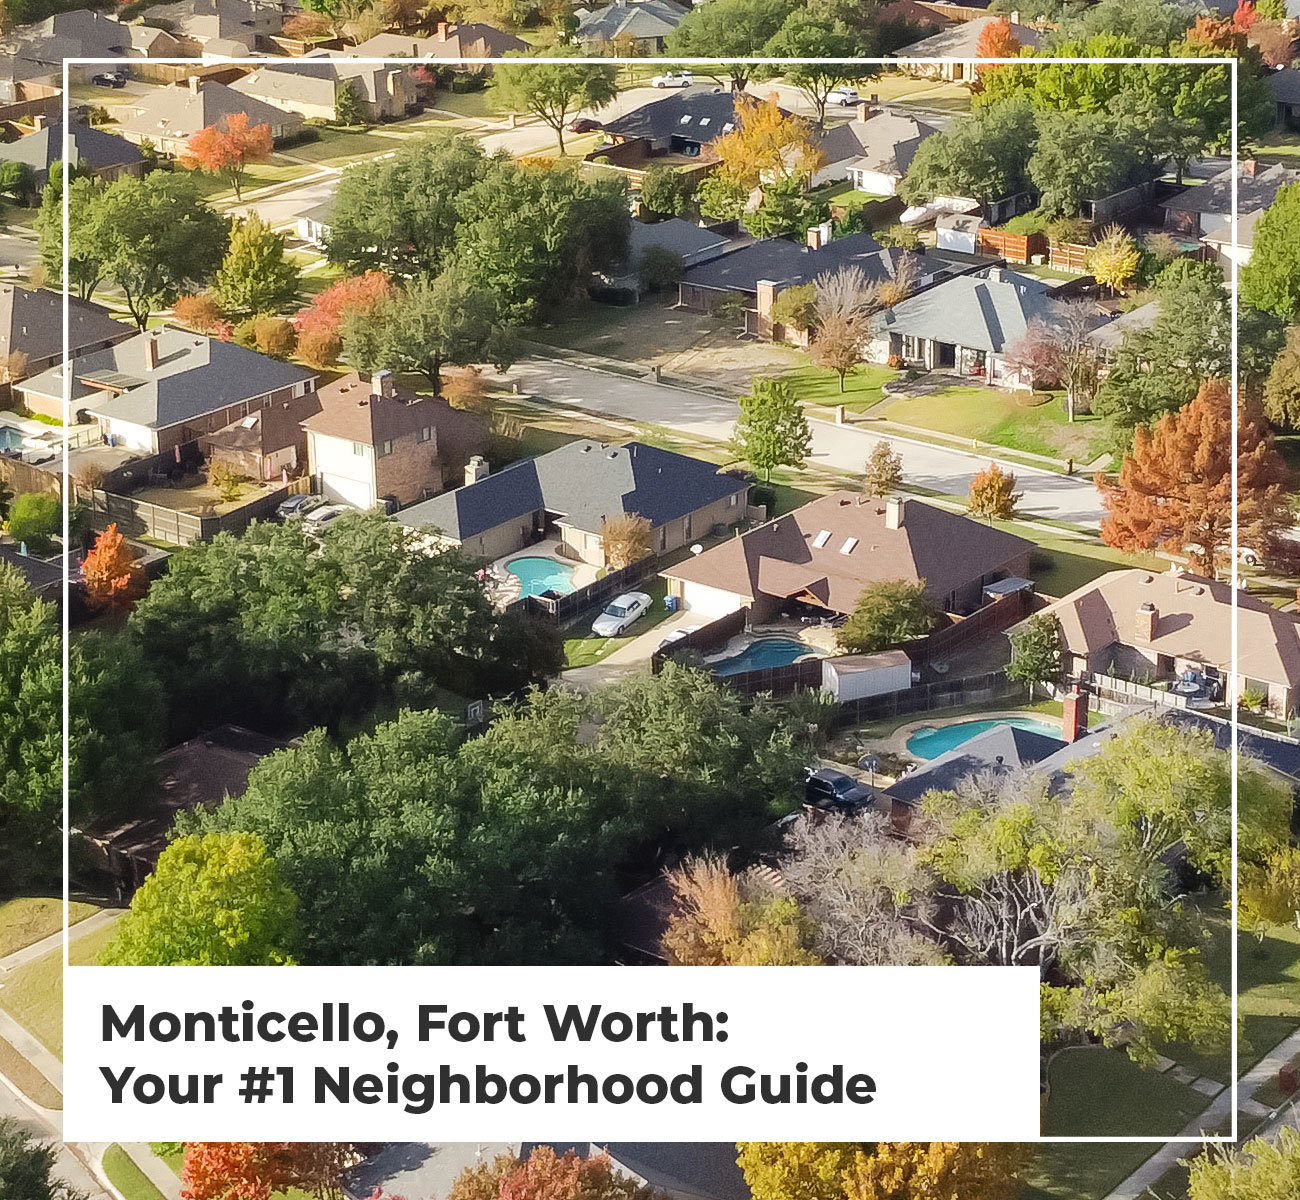 Neighborhood Guide to Monticello, Fort Worth